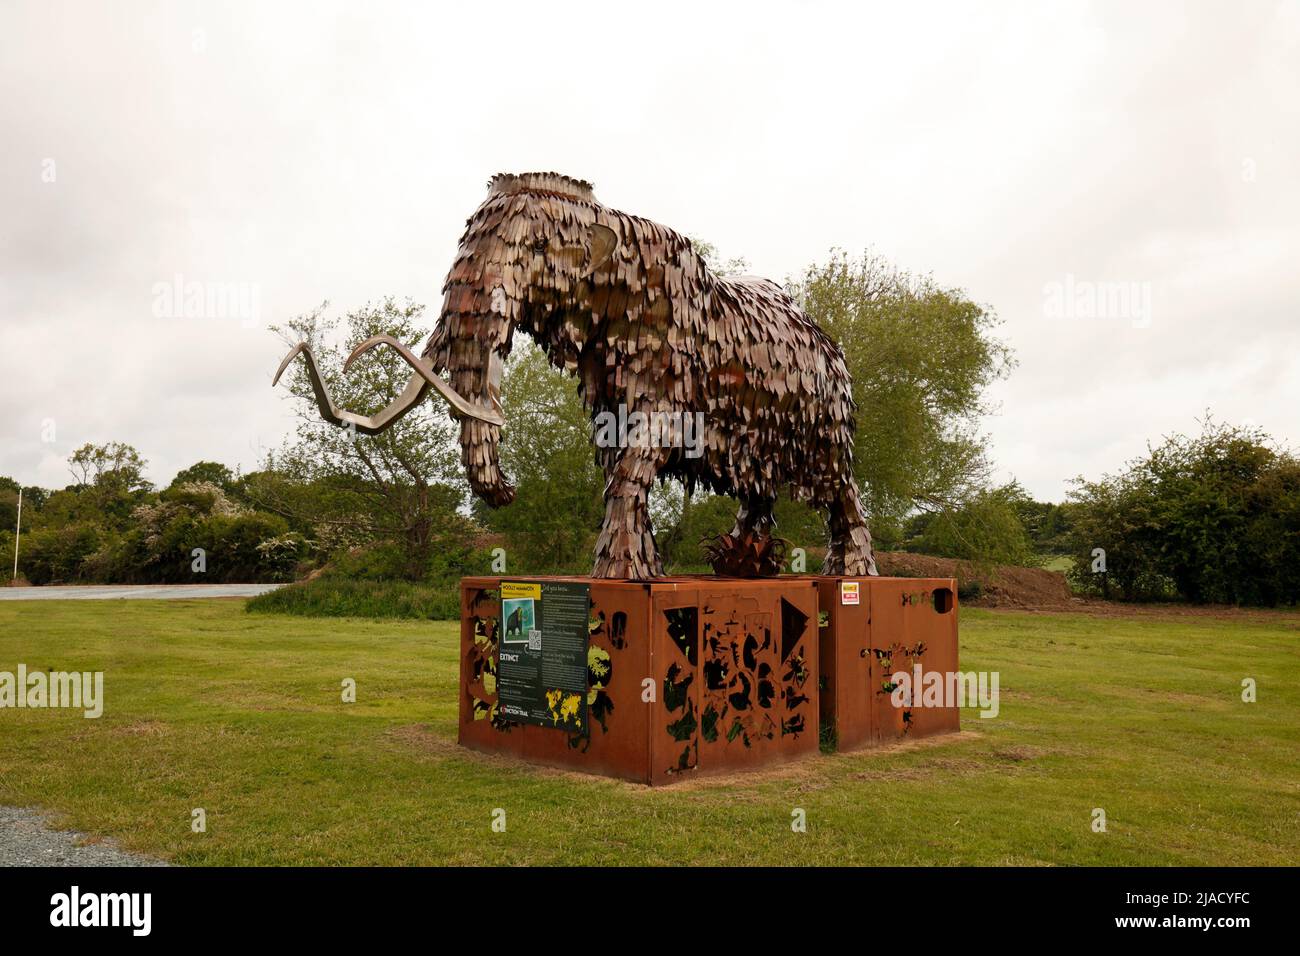 Statue made from scrap metal car parts of a Wooly Mammoth, at British Ironworks centre, Shropshire sculpture park, UK. Stock Photo